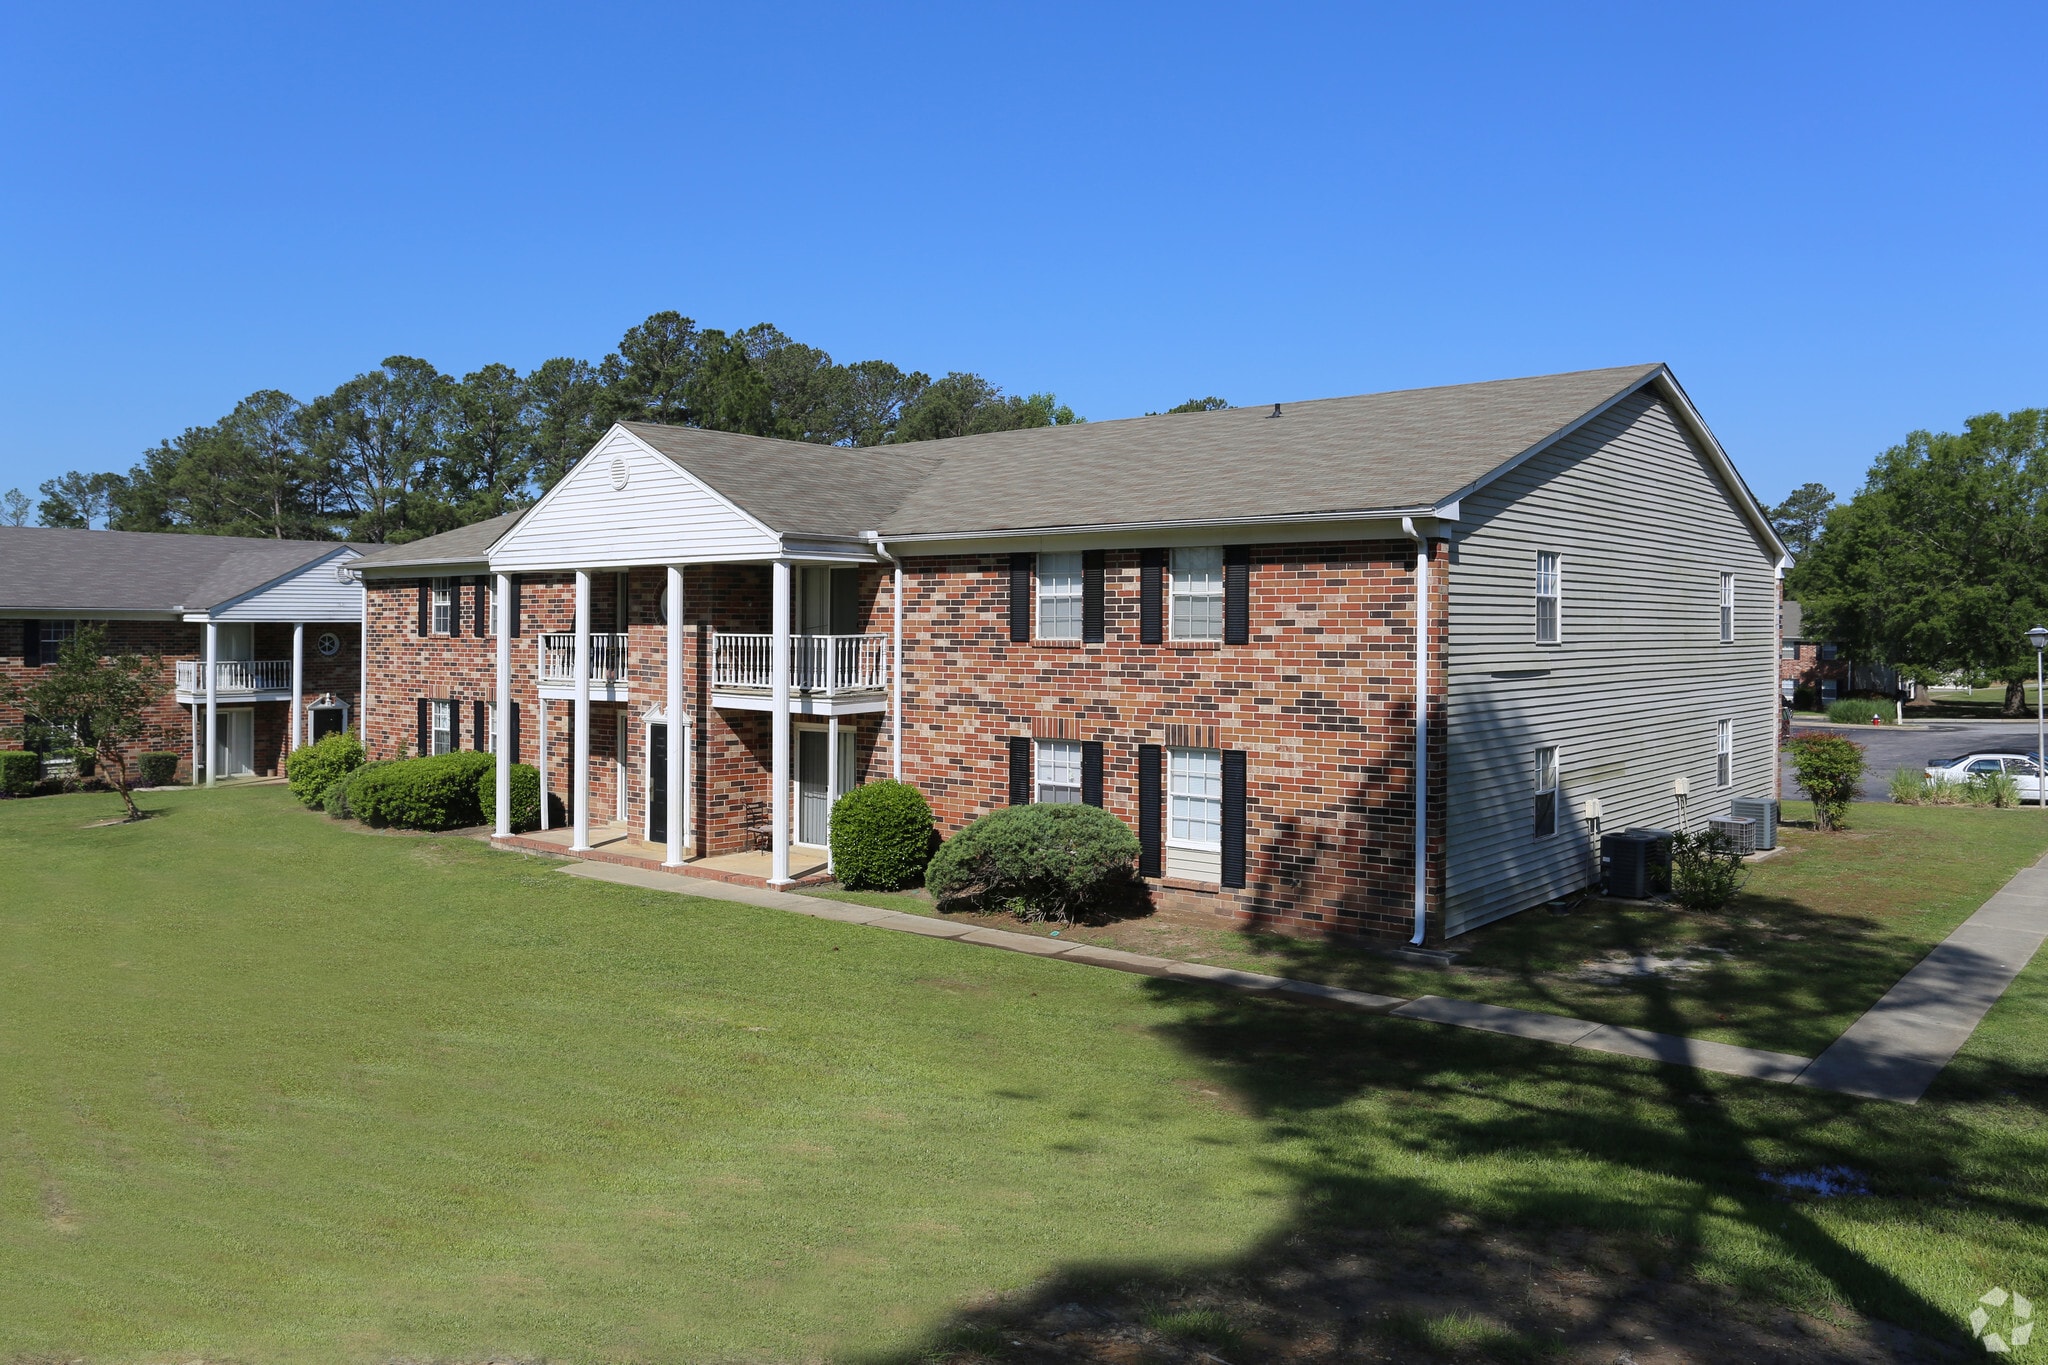 Beautiful exterior view of the buildings at Mallard Pointe Apartments located in Columbia, SC